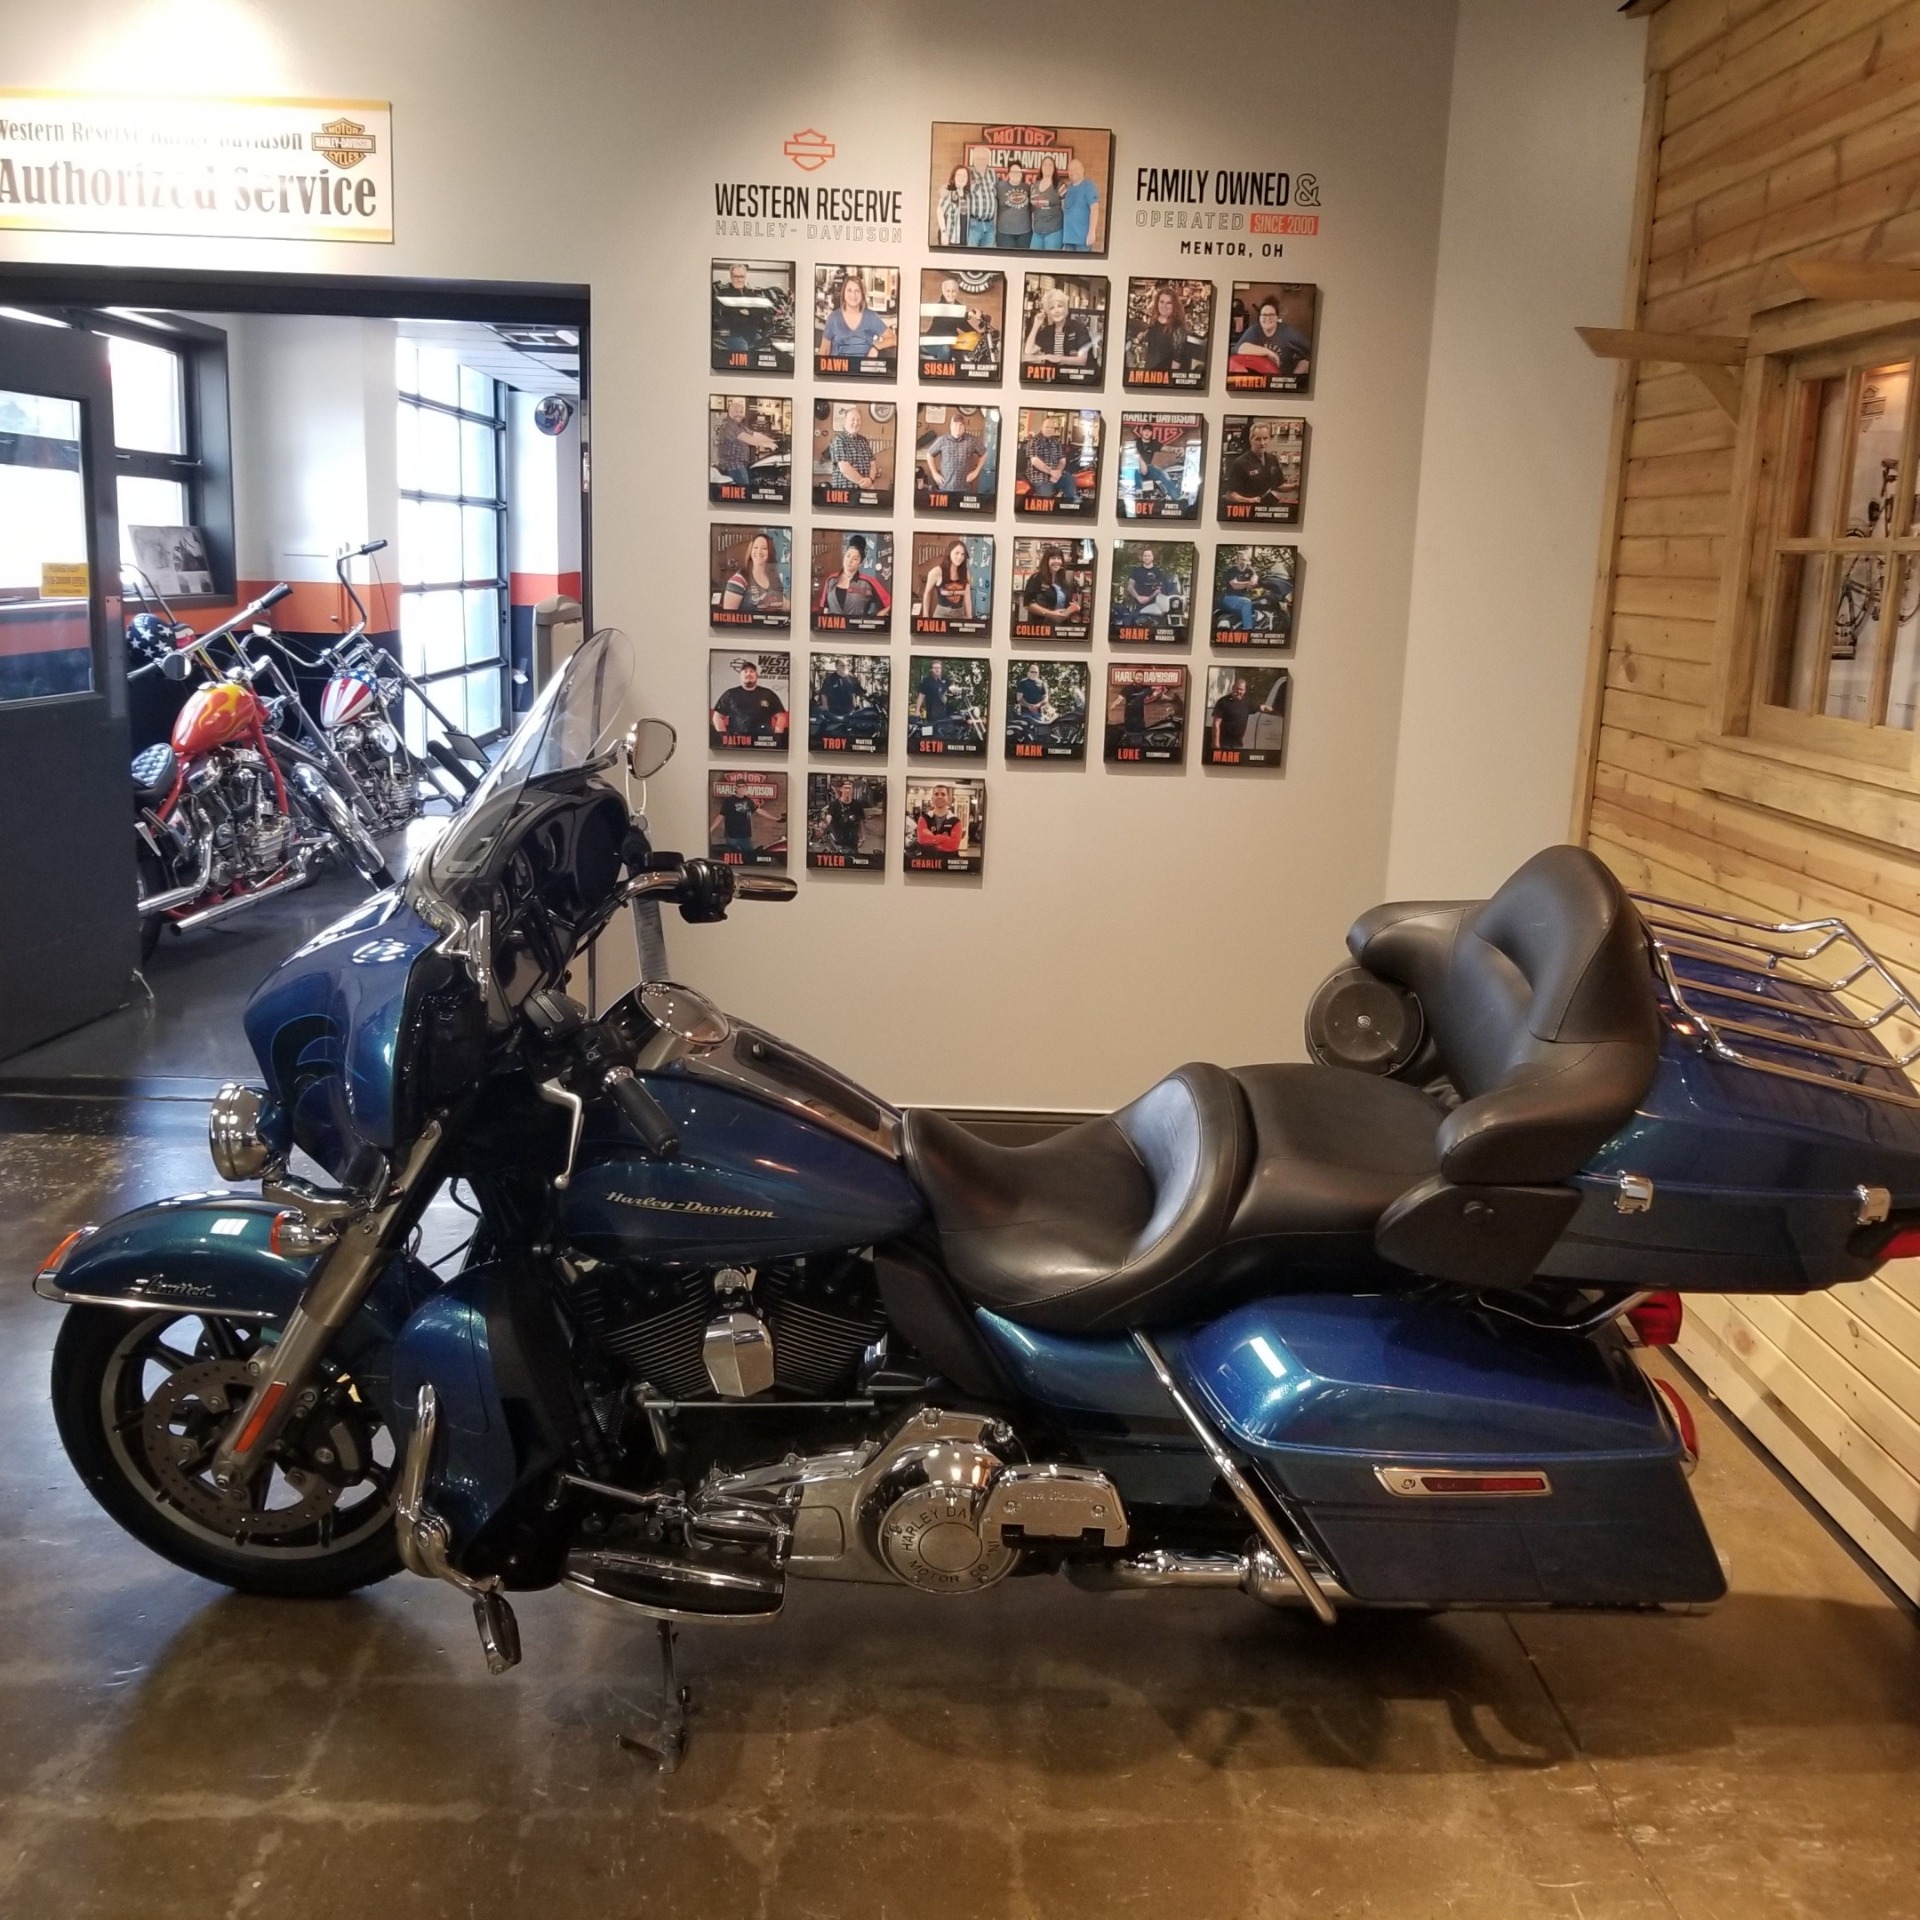 Used 2014 Harley Davidson Ultra Limited Motorcycles In Mentor Oh Stock Number 14 0423976